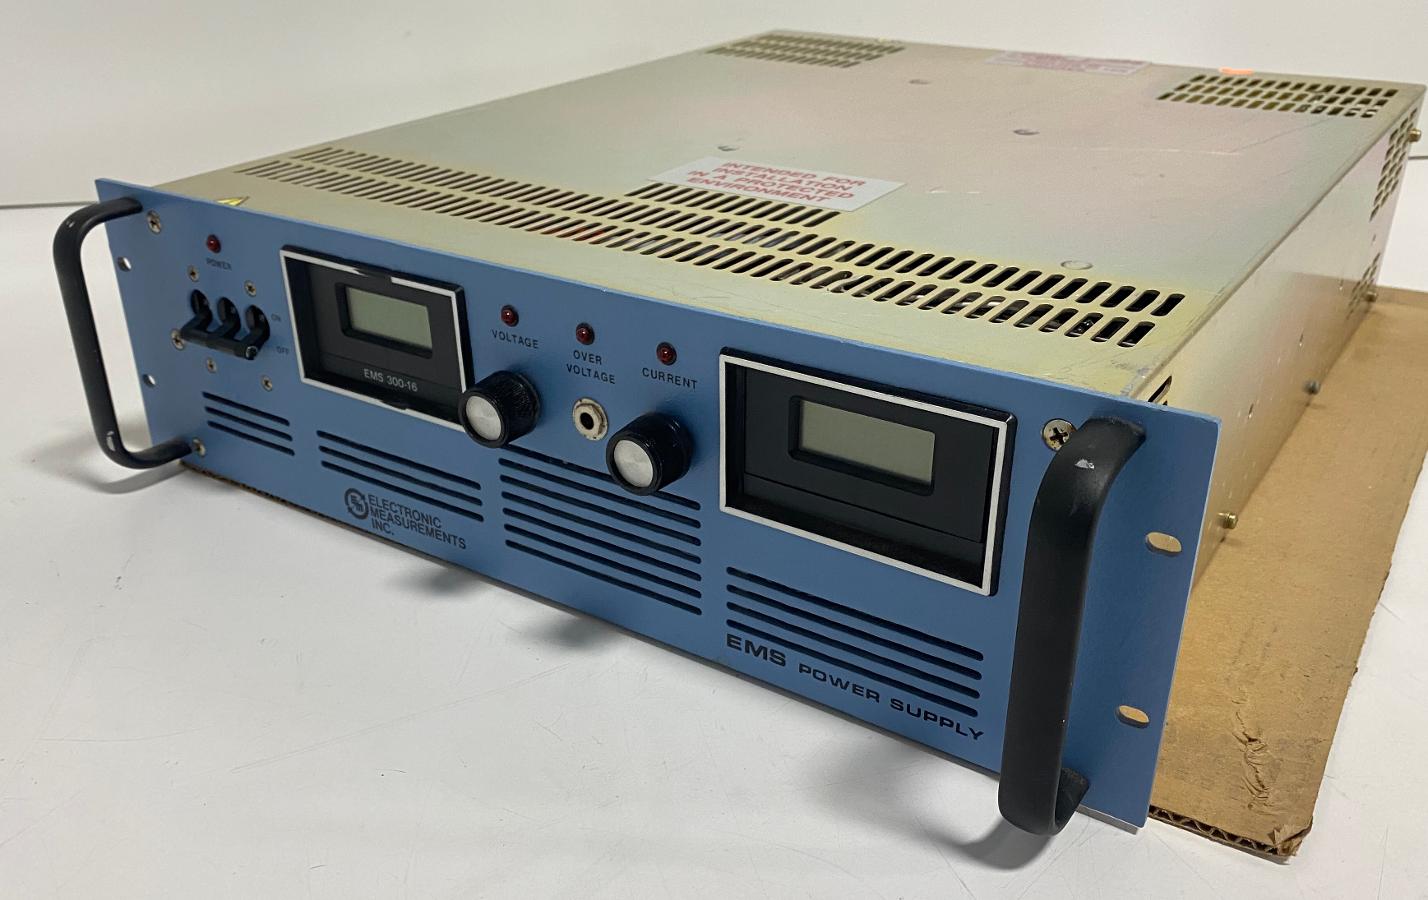 ELECTRONIC MEASUREMENT INC. DC POWER SUPPLY 300V 16A